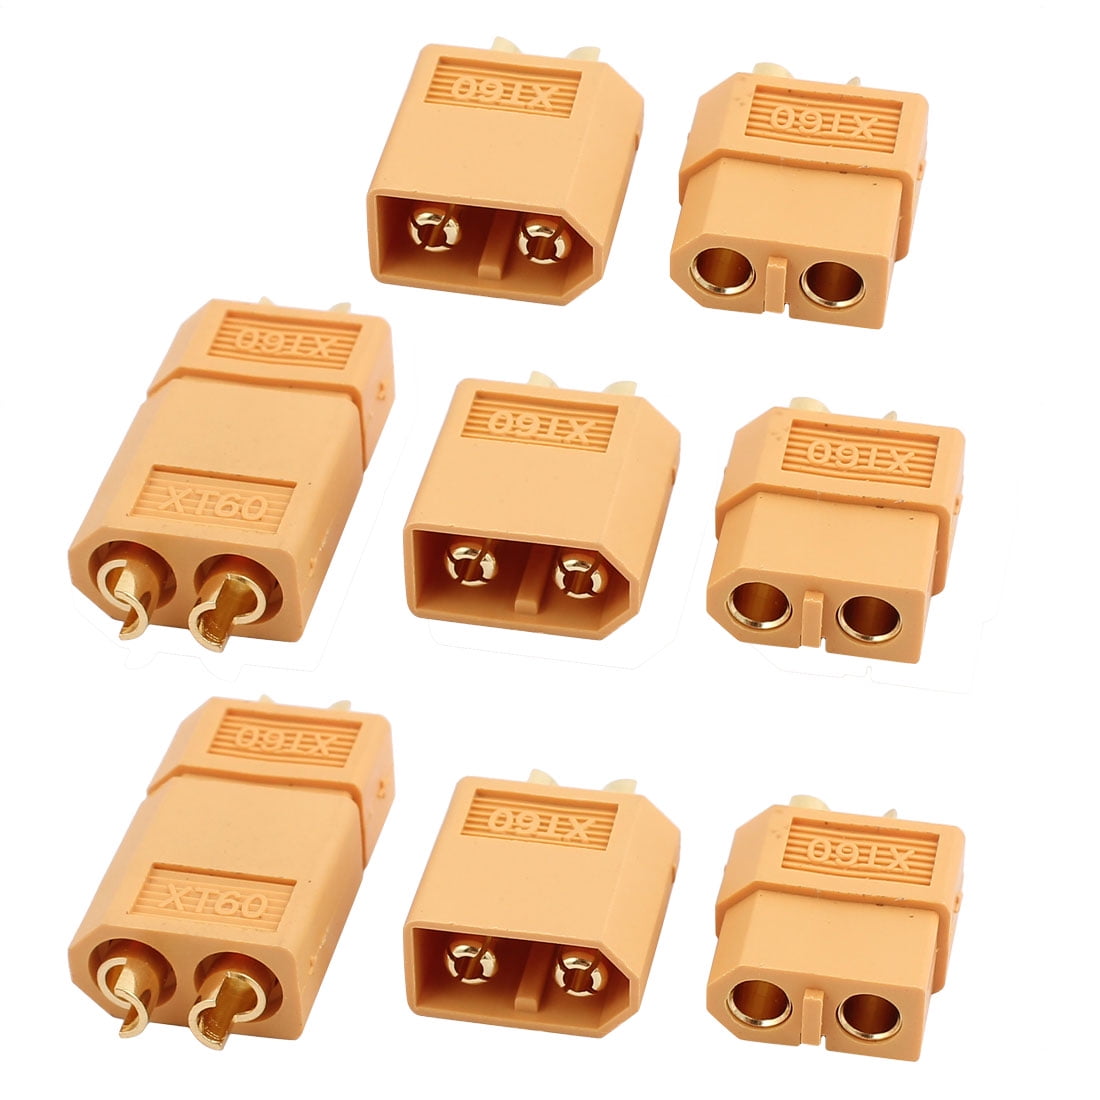 XT60 Connector Pair - Male/Female Yellow